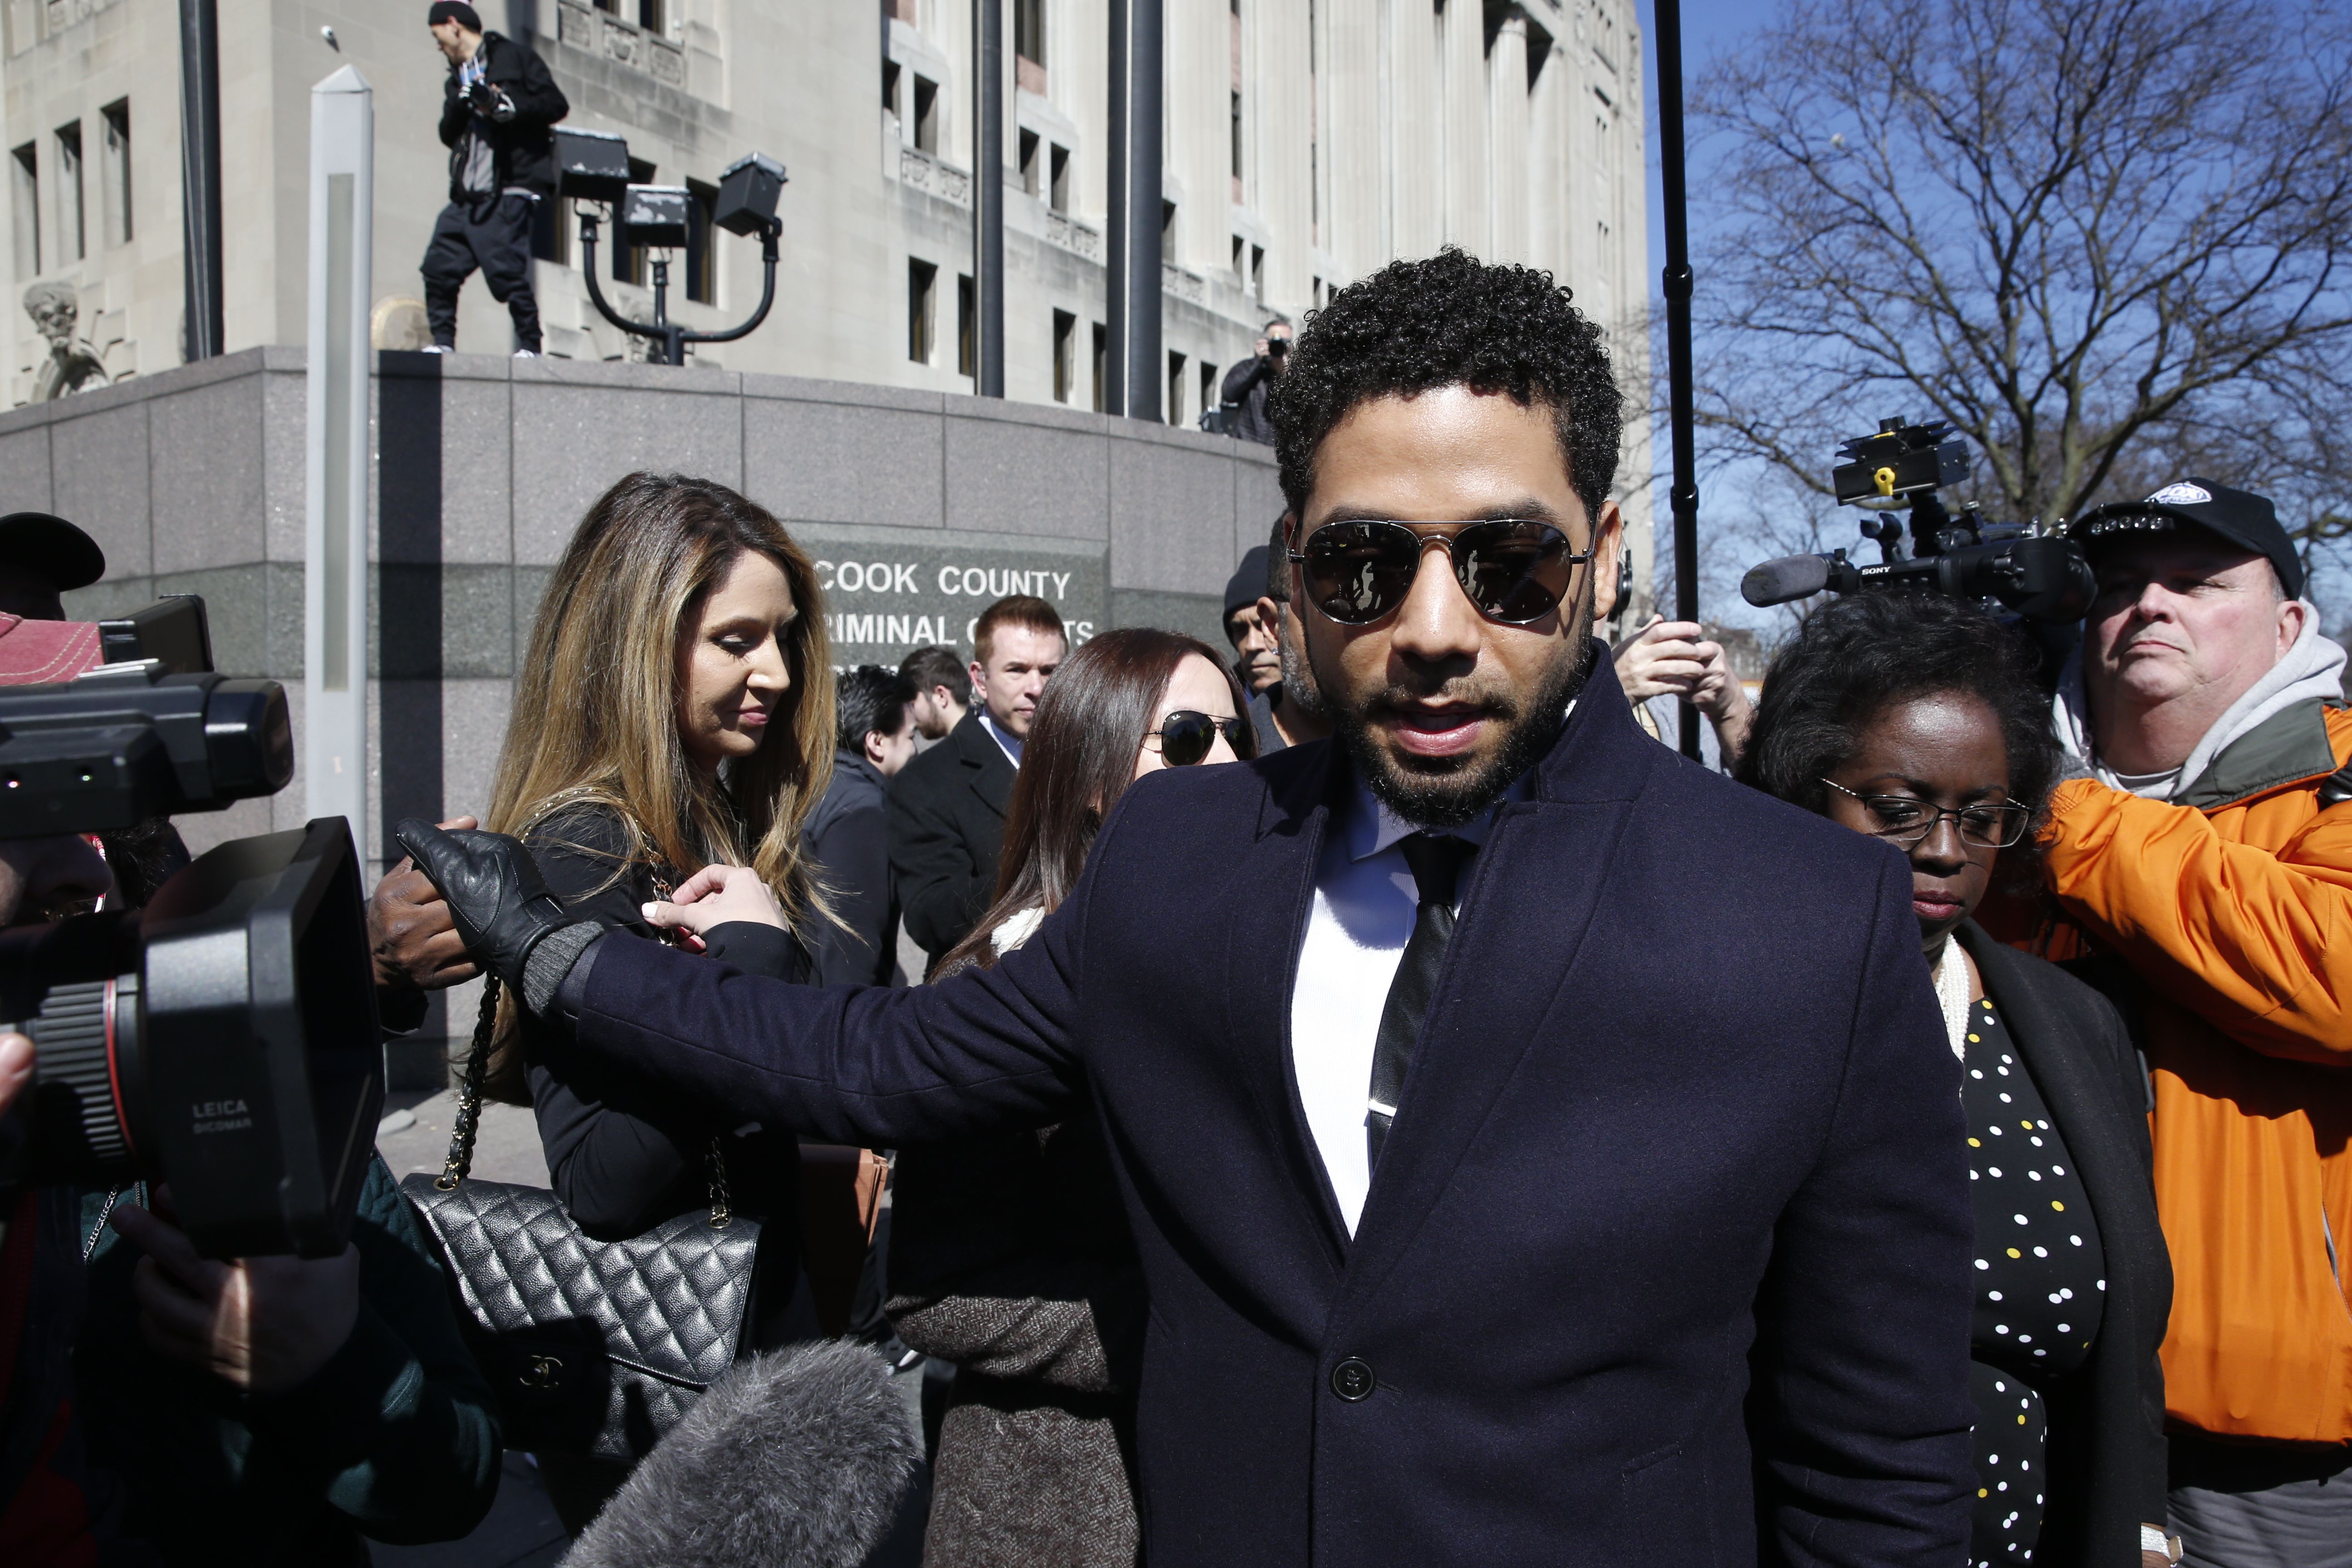 Jussie Smollett at the Cook County Criminal Court in Chicago | Source: Getty Images/GlobalImagesUkraine